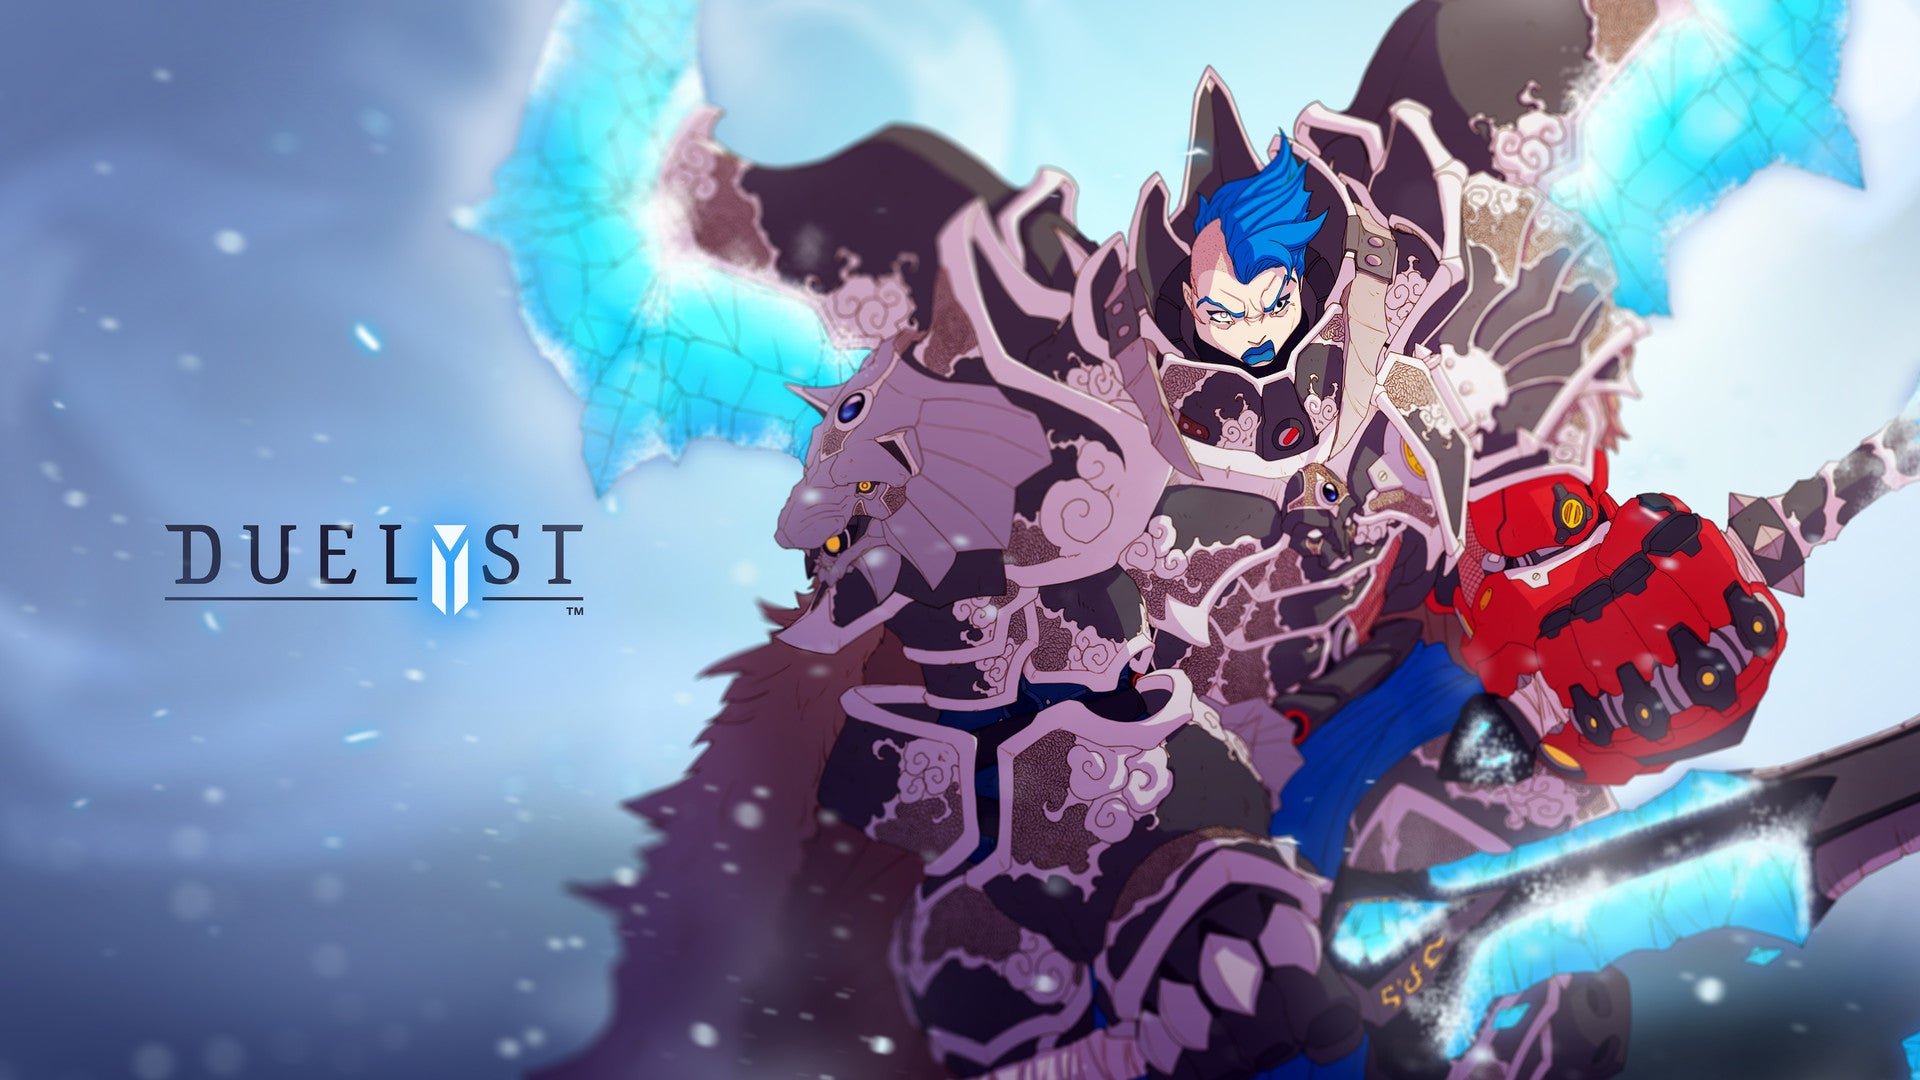 Duelyst Has Some Of The Best Character Art You'll See | Kotaku Australia